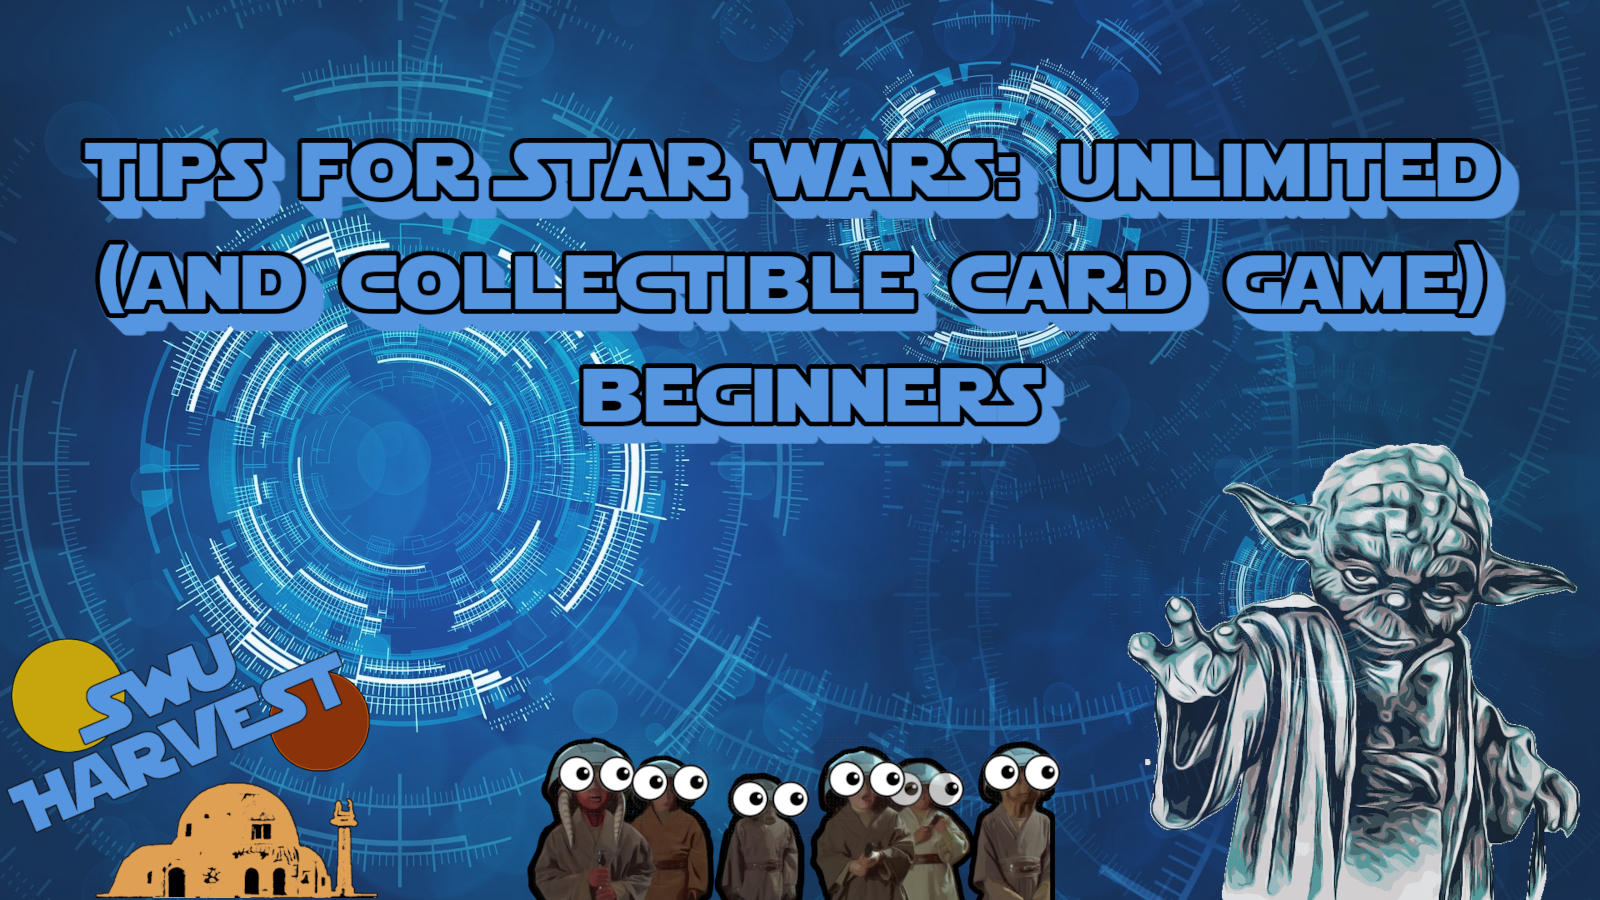 Video: Tips for Star Wars: Unlimited (And CCG) Beginners